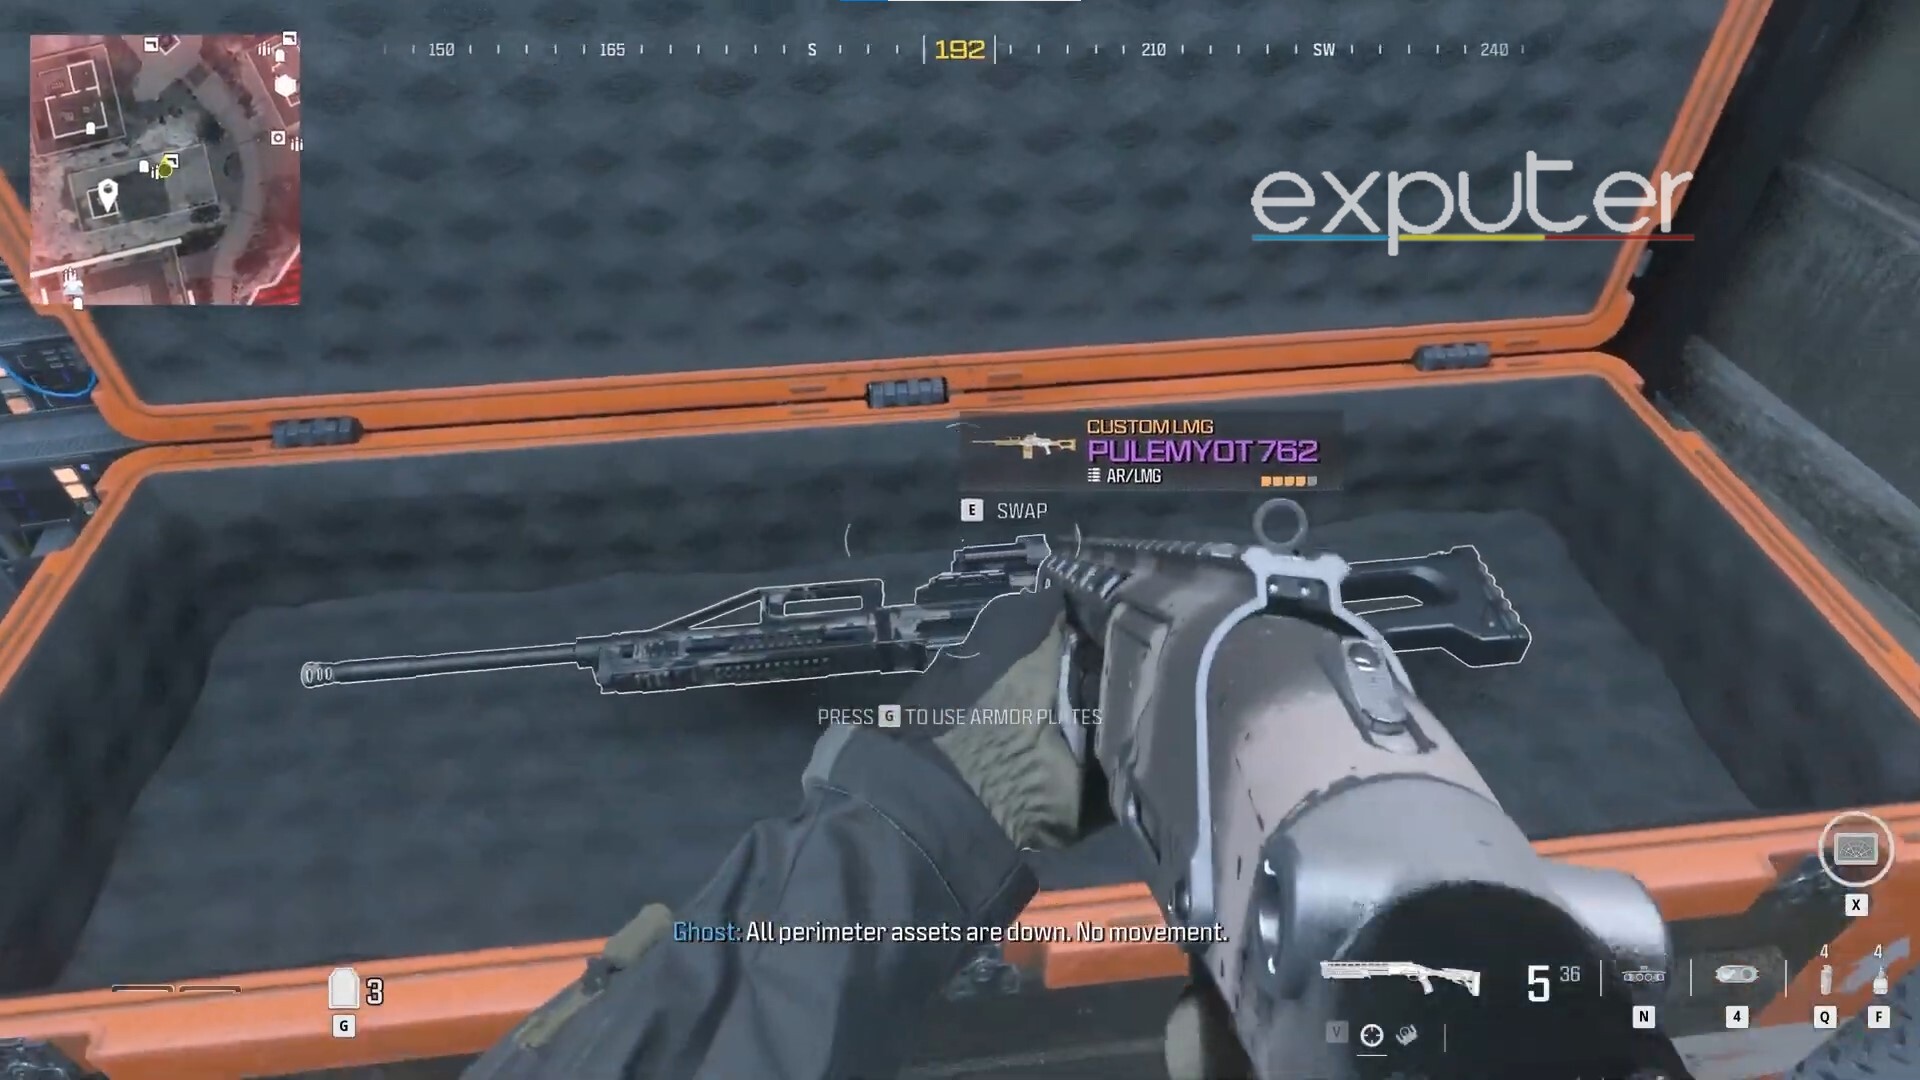 Pulemyot From All Weapons and Items in Oligarch in MW3